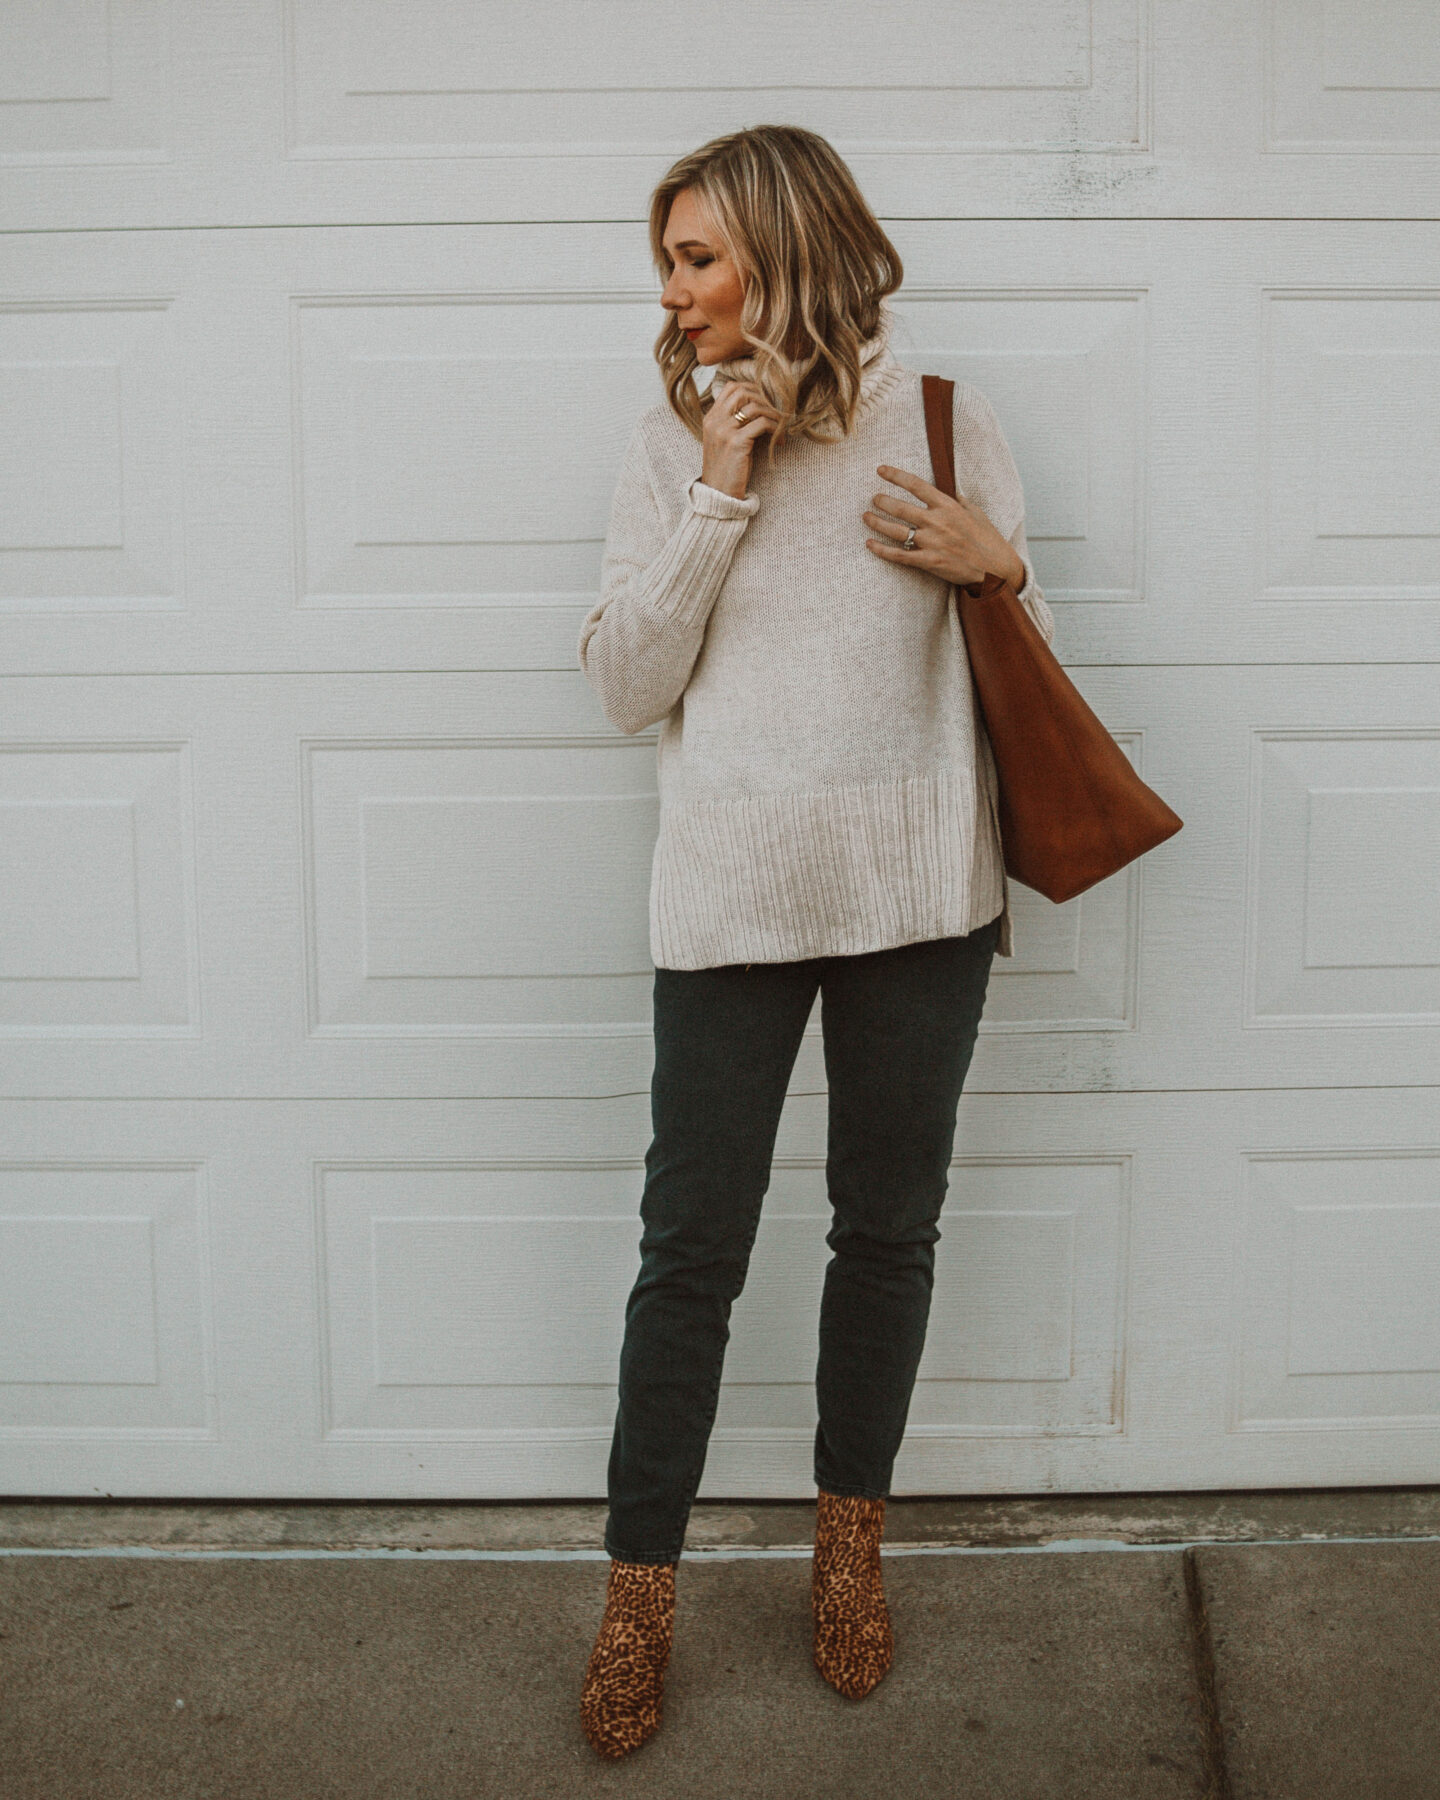 cozy, stay at home outfits, tunic turtleneck sweater, affordable mom jeans, leopard print boots, madewell transport tote